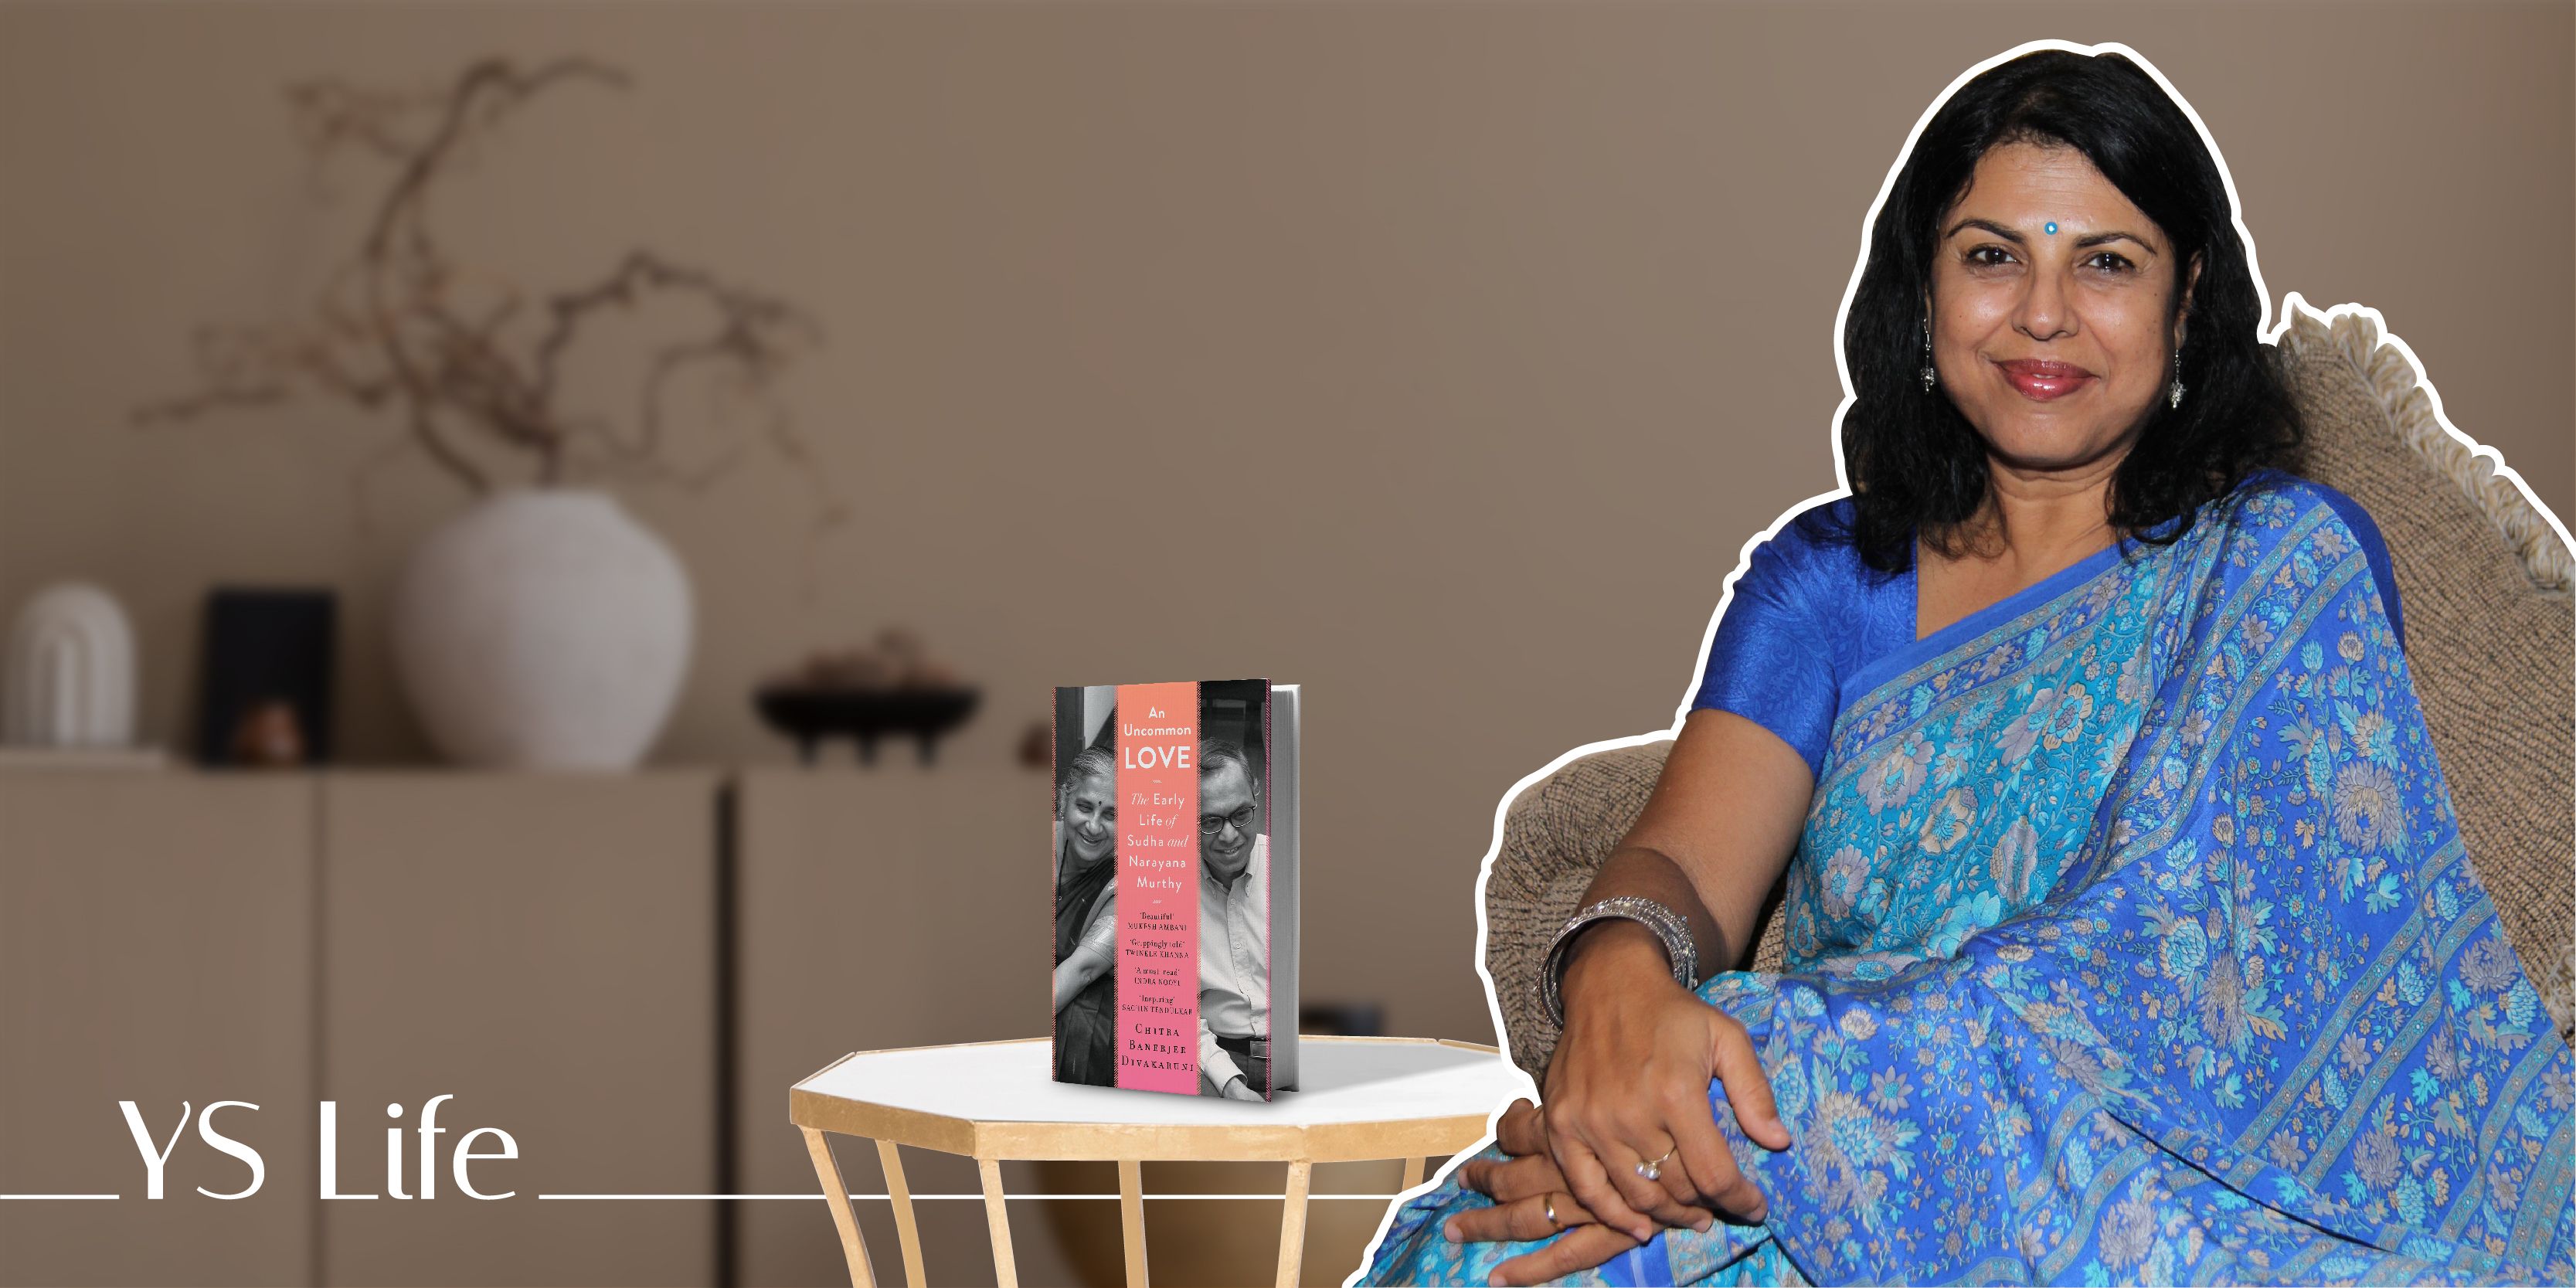 Author Chitra Banerjee Divakaruni traces the inspiring early life of Sudha and Narayana Murthy in her new book